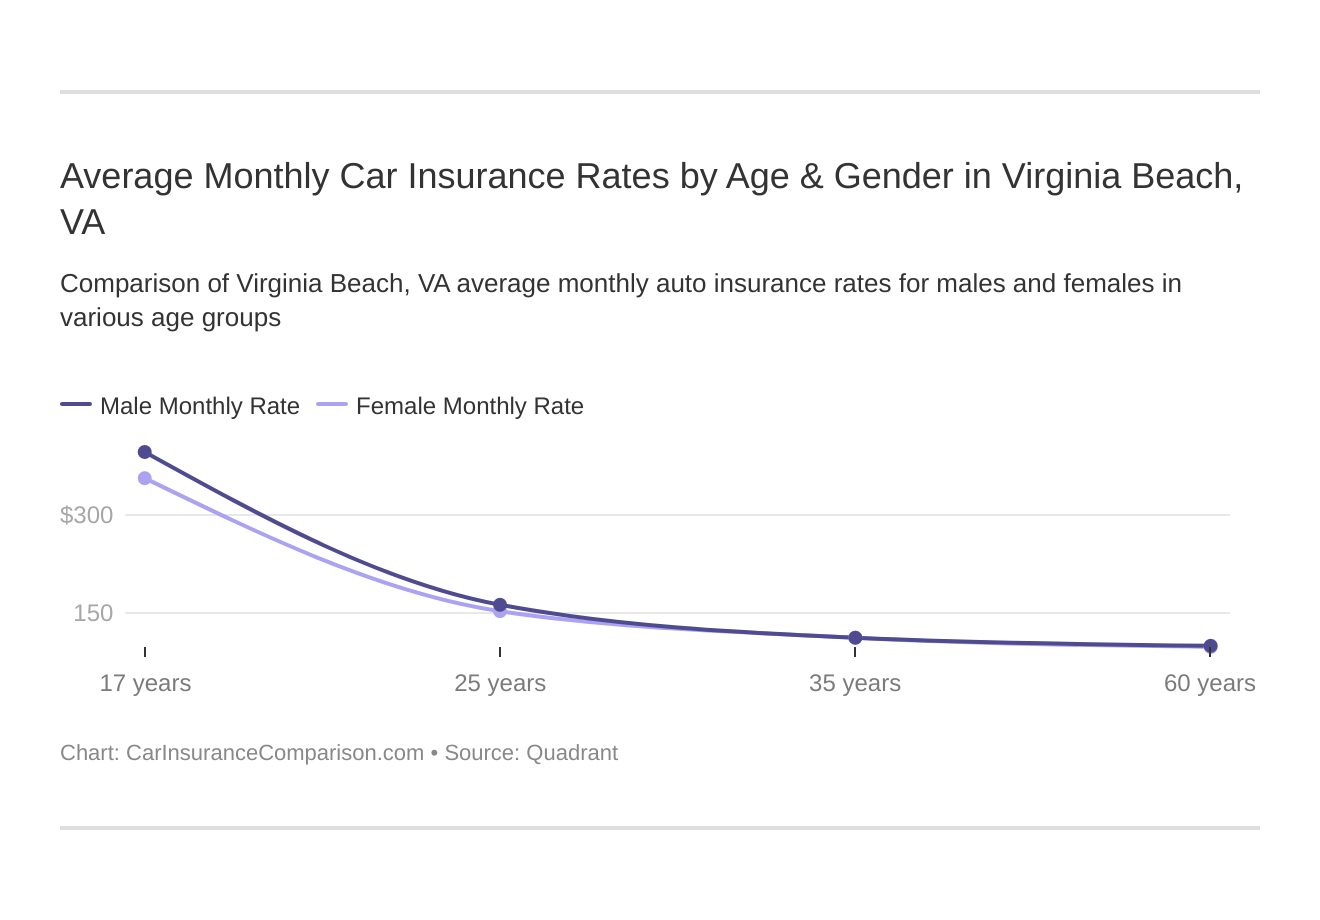 Average Monthly Car Insurance Rates by Age & Gender in Virginia Beach, VA